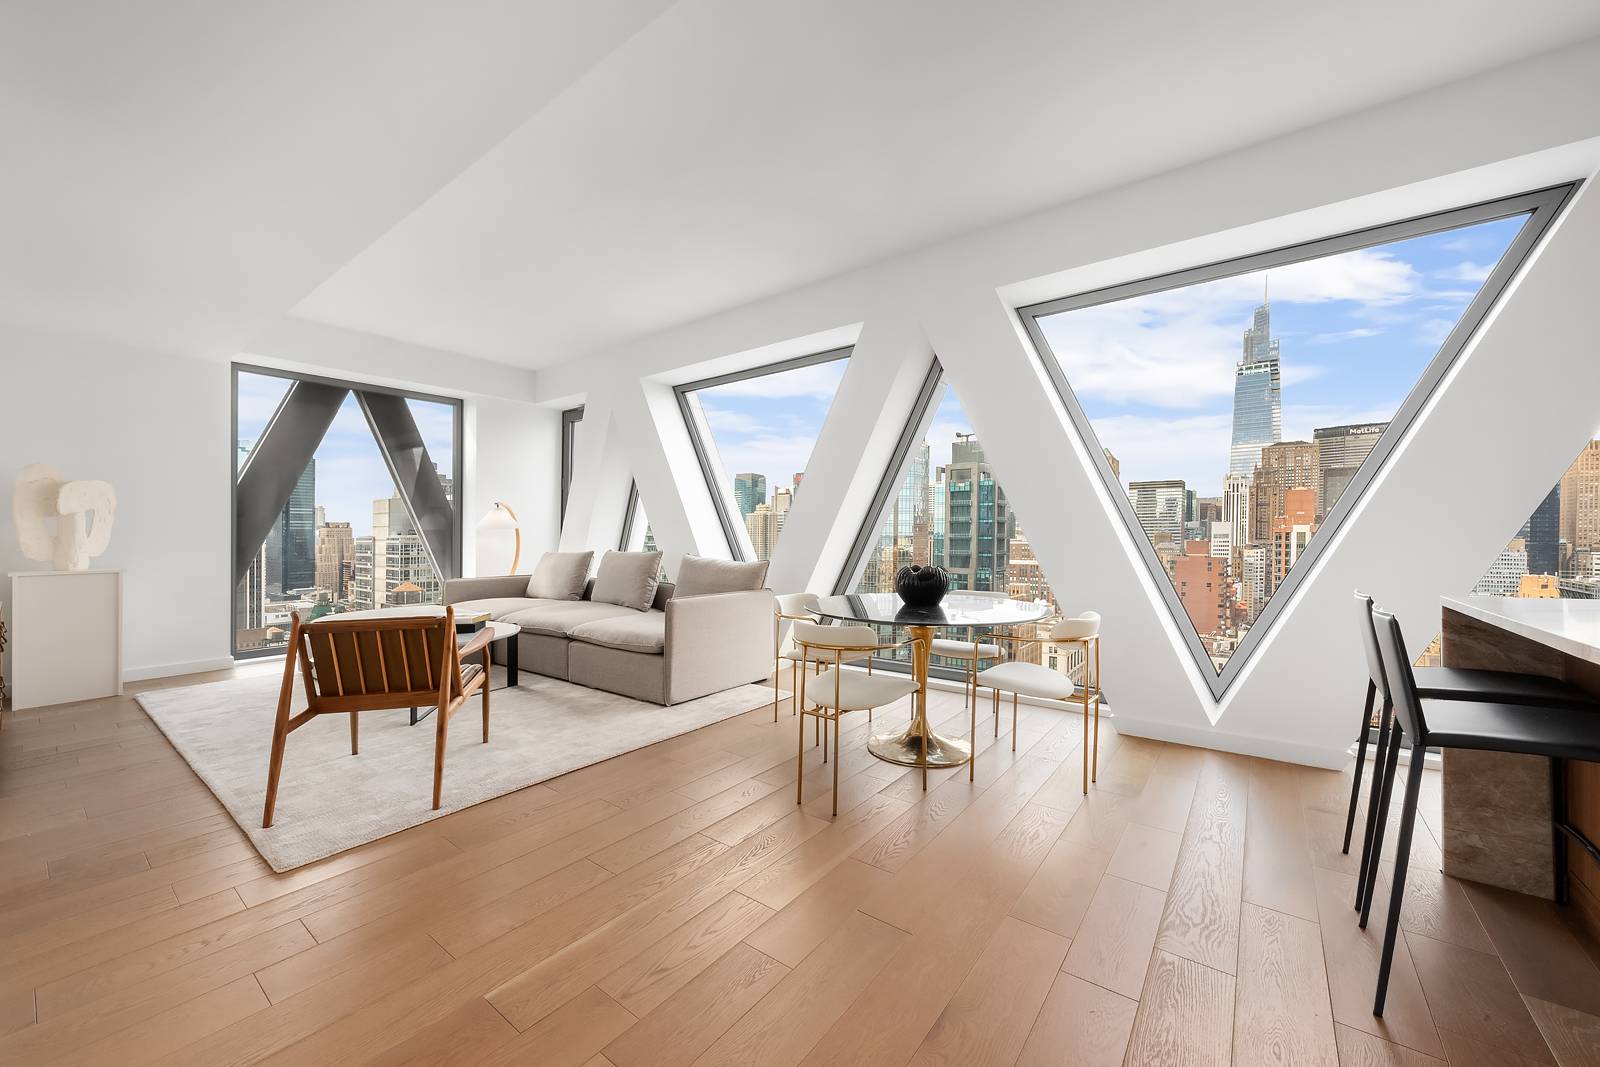 A blend of crisp, contemporary form with carefully considered function, the residences at 30 East 31st Street represent the pinnacle of quintessential Manhattan living.